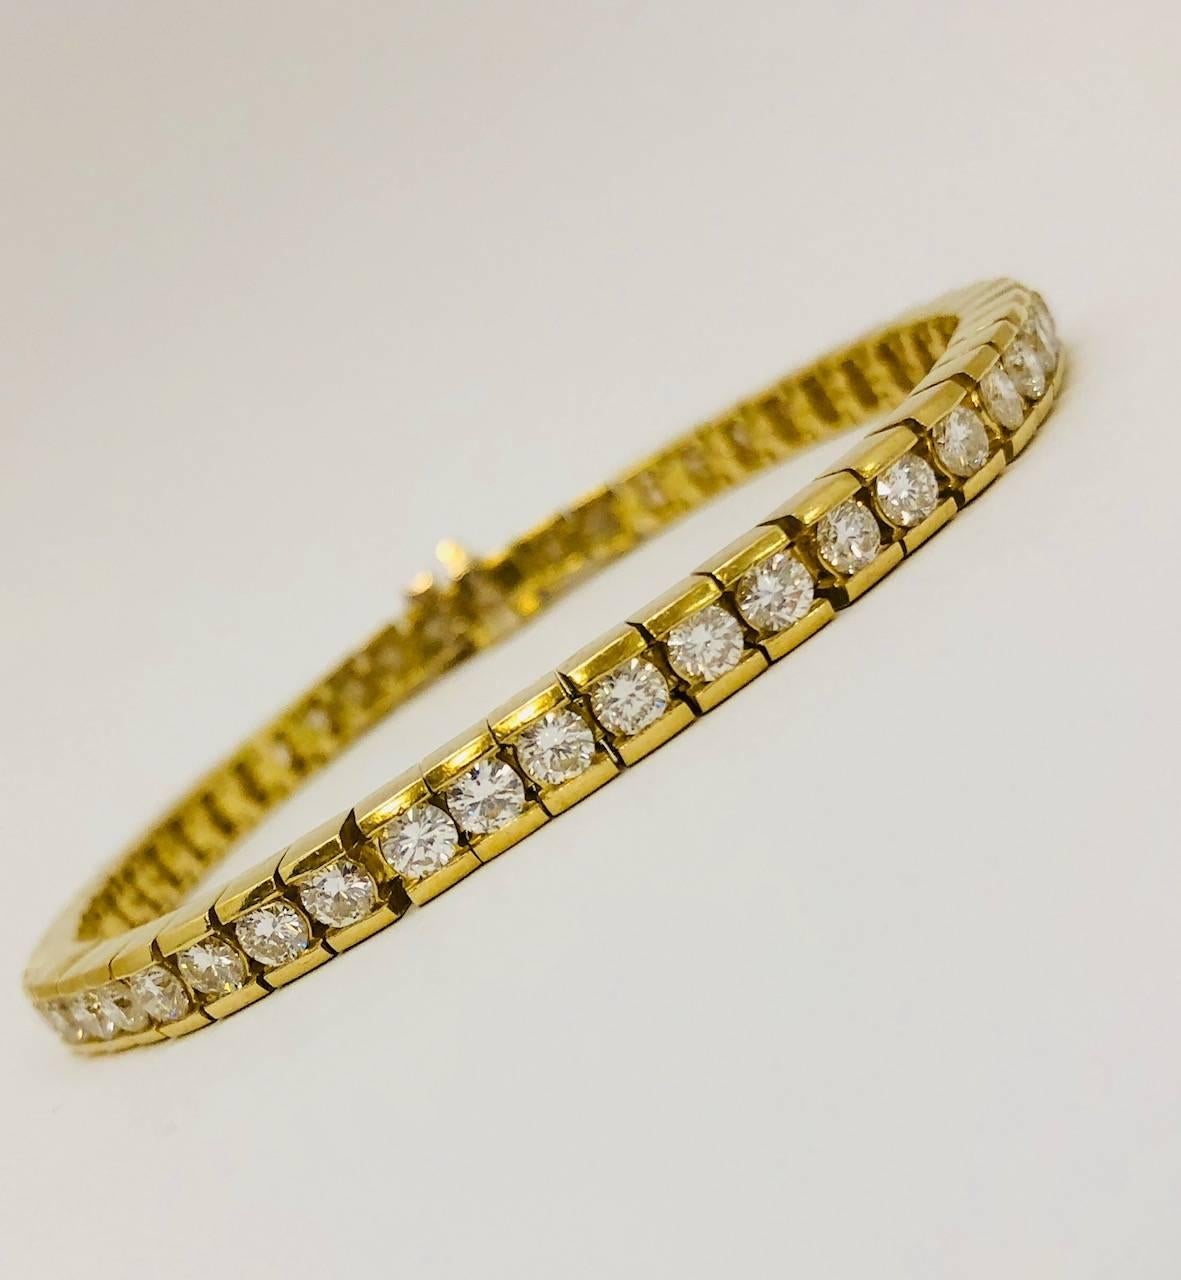 A fine jewelry wardrobe staple!  The ever recognizable, wear it with everything, diamond tennis bracelet!  Fabricated in 18 karat matte yellow gold, each diamond is individually channel set in their own box link.  This totally eliminates the chance